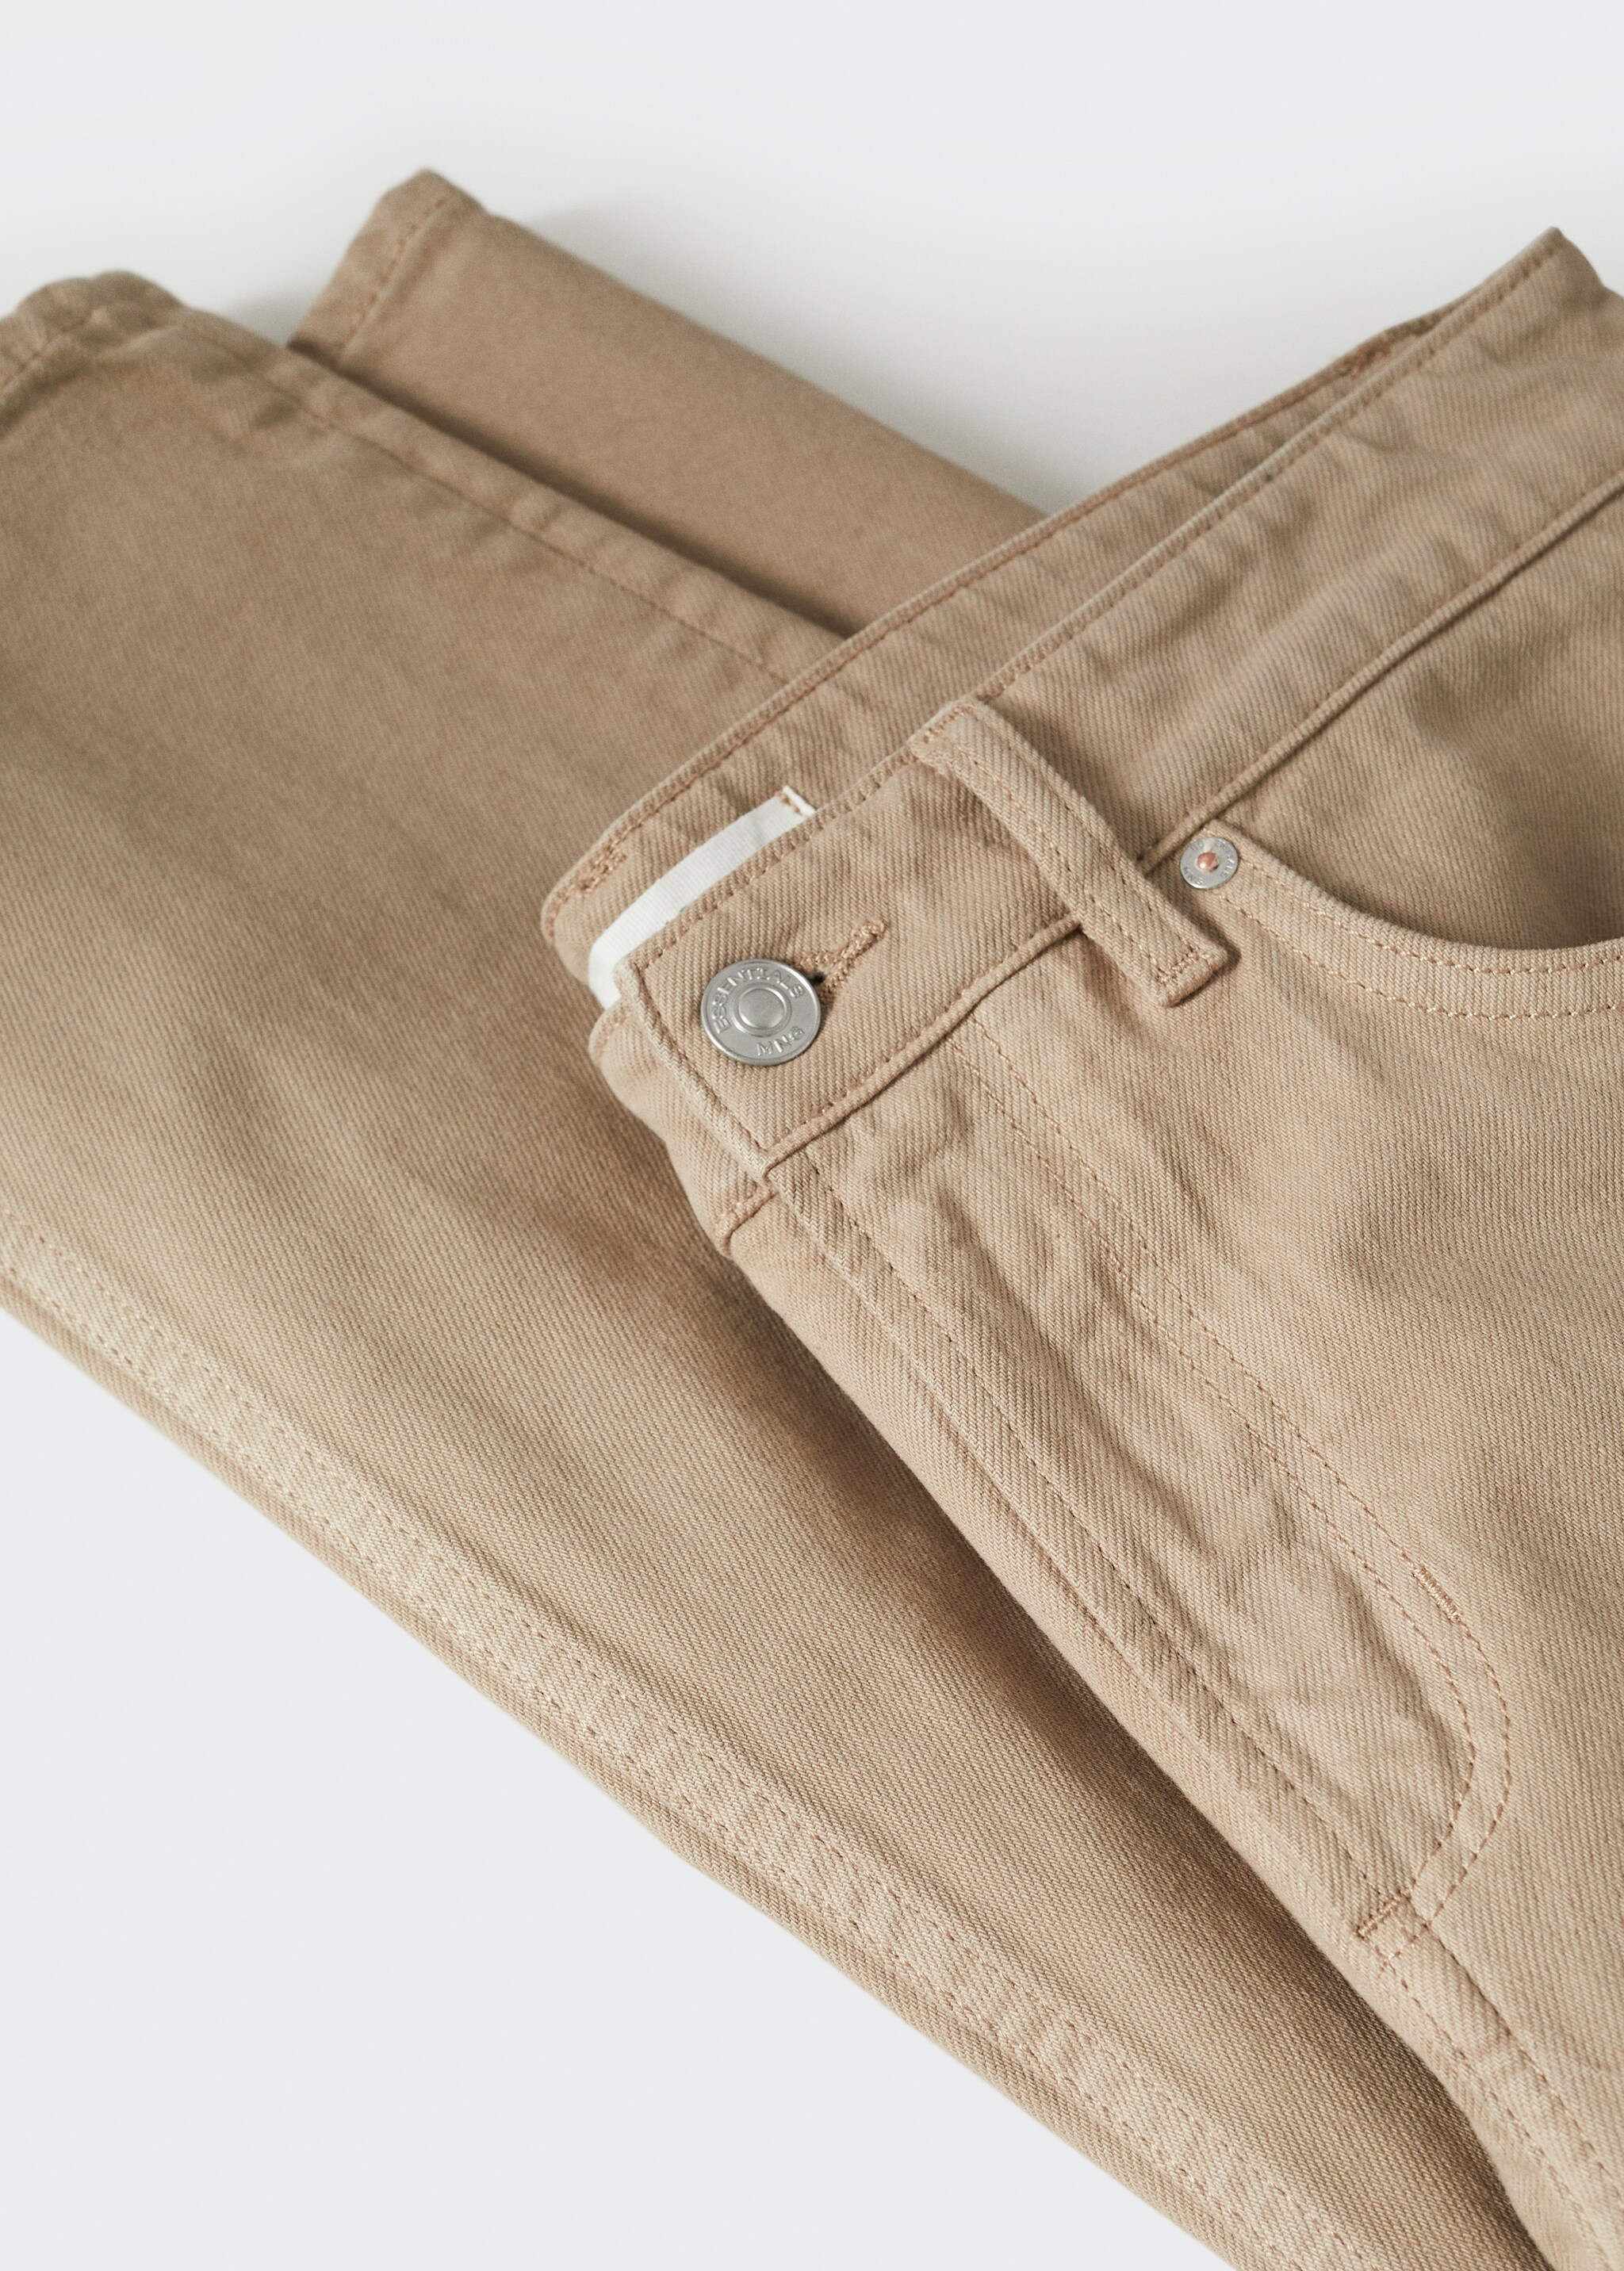 Ben tapered cropped jeans - Details of the article 8